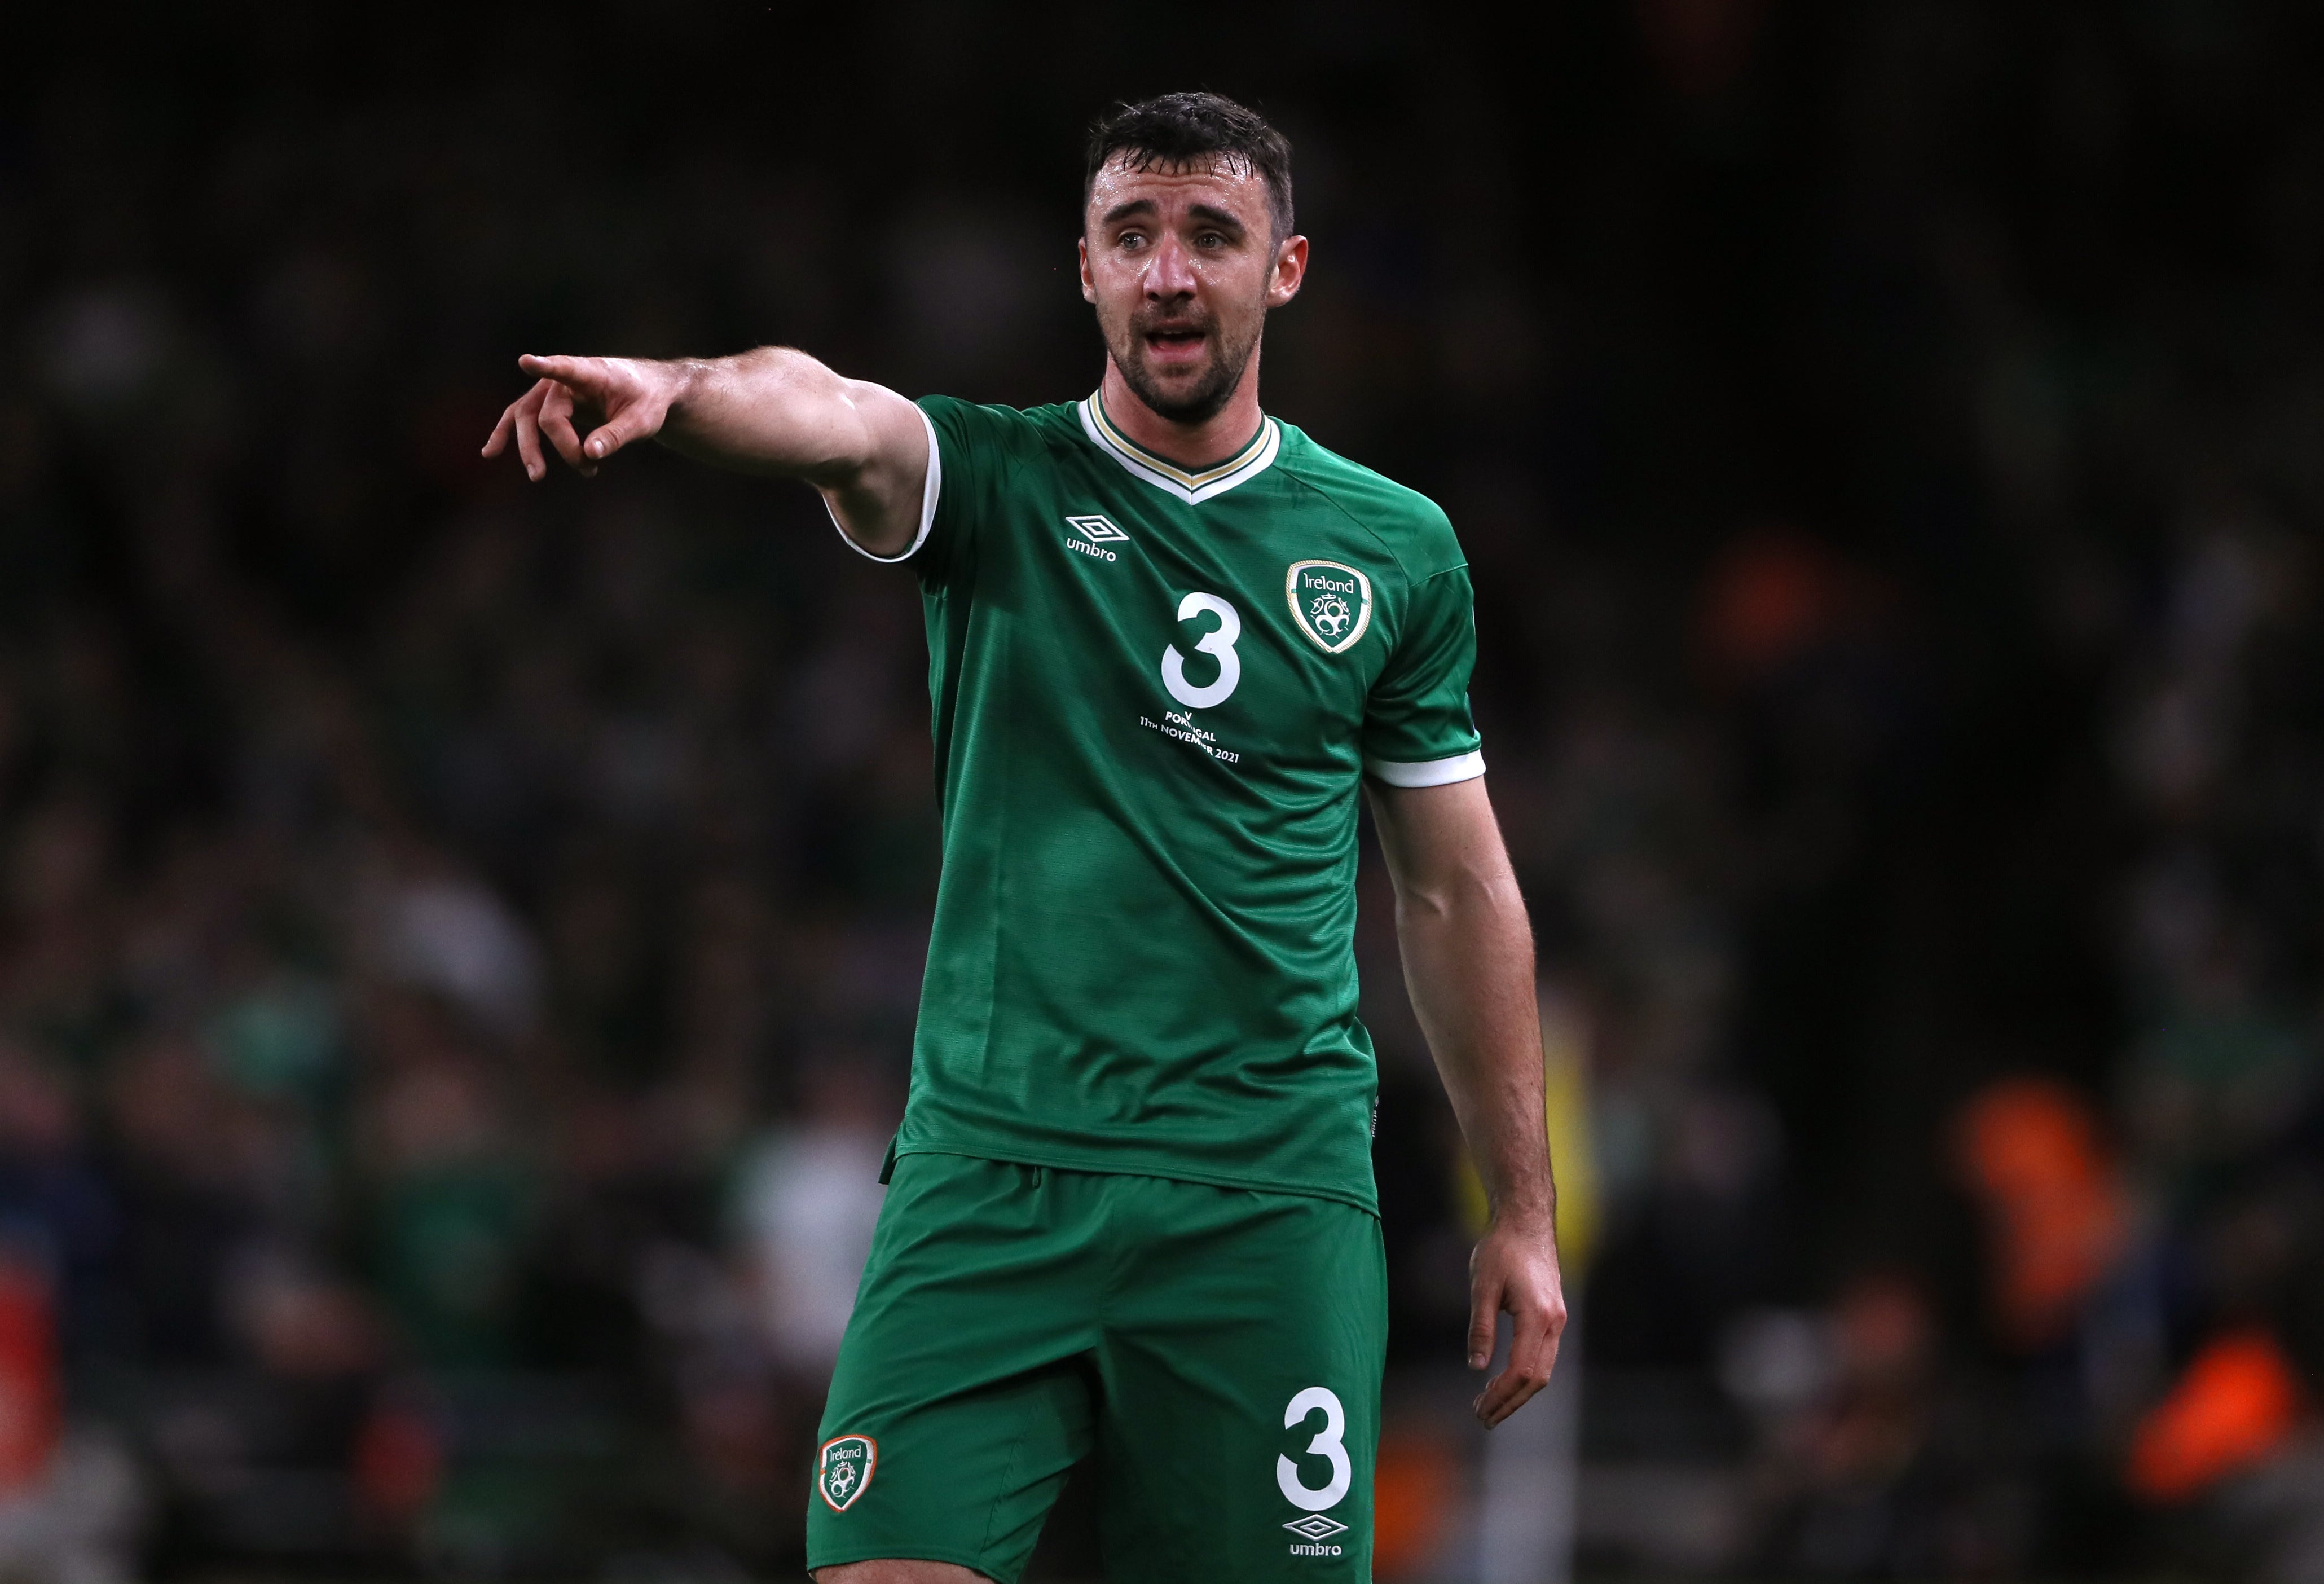 Defender Enda Stevens has seen a change in the Republic of Ireland’s DNA (Brian Lawless/PA)